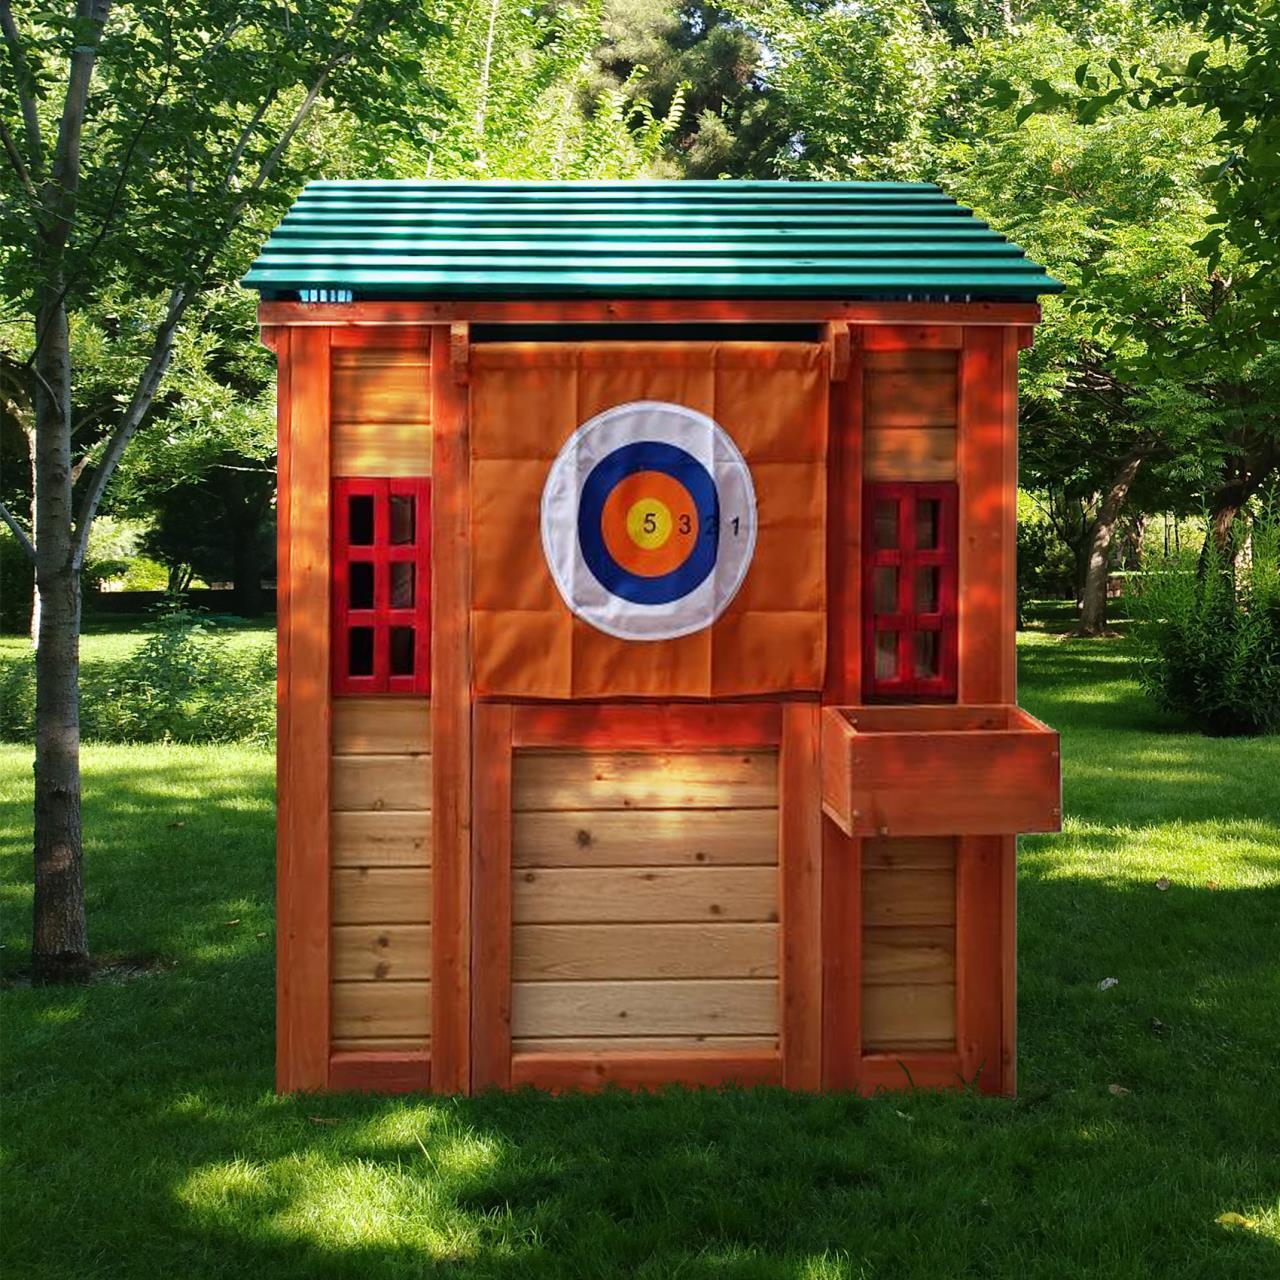 Eco-friendly Outdoor Wooden 4-in-1 Game House for kids garden playhouse with different games on every surface,Solid wood,61.4"Lx45.98"Wx64.17"H